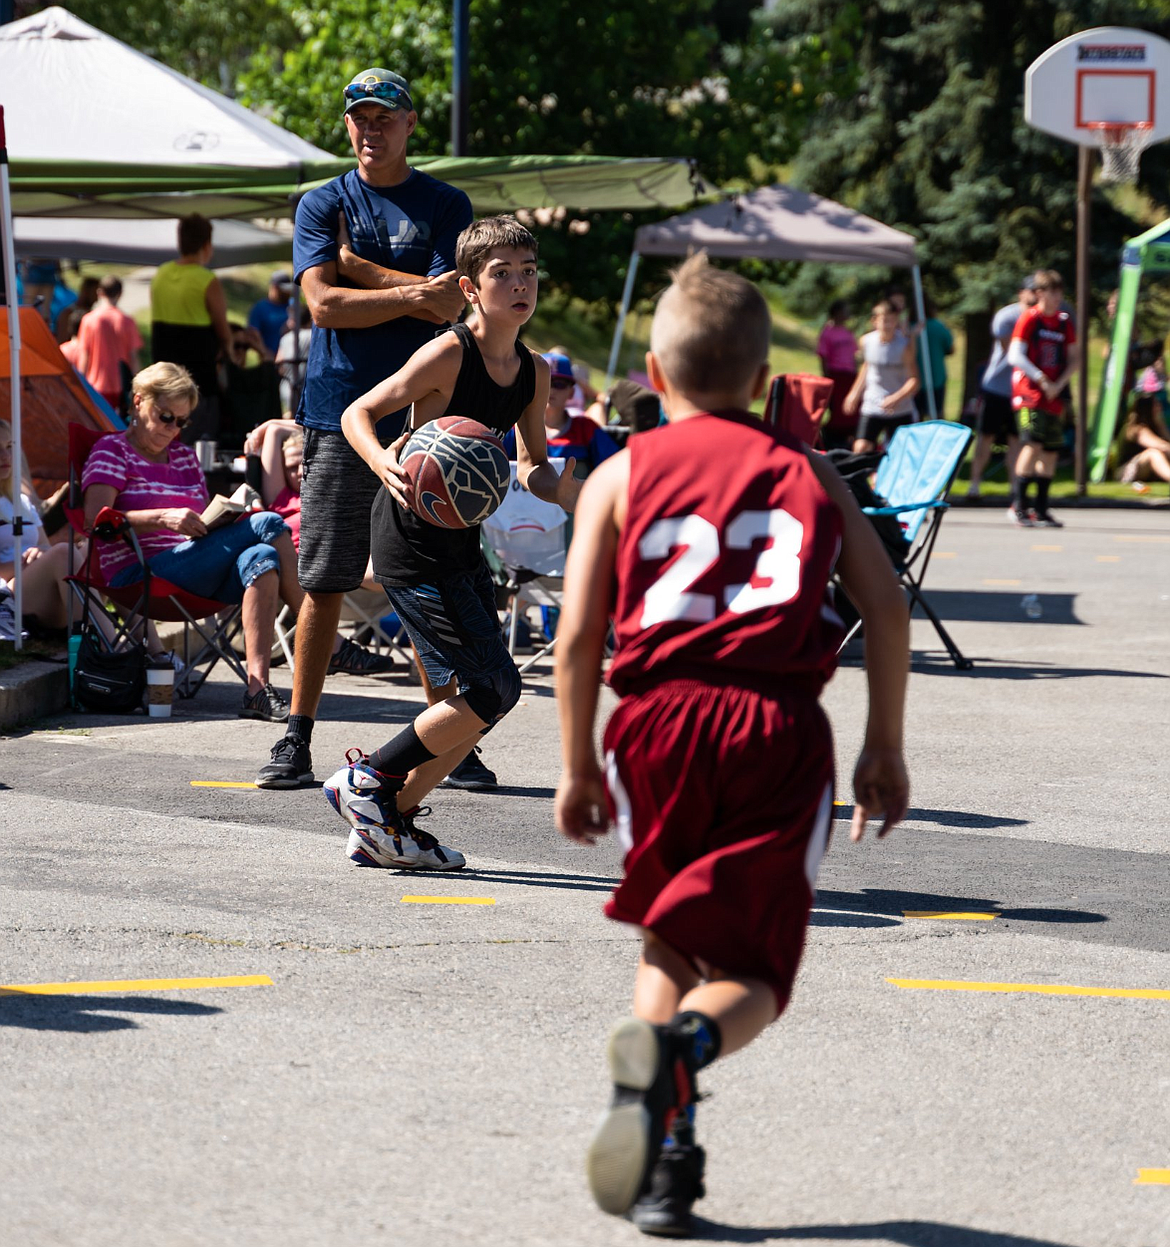 Photo by NATHAN DUGAN
Radley Groth (dribbling) was one of nearly 600 players who competed at July&#146;s SilverHoops 3-on-3 Tournament in Kellogg.